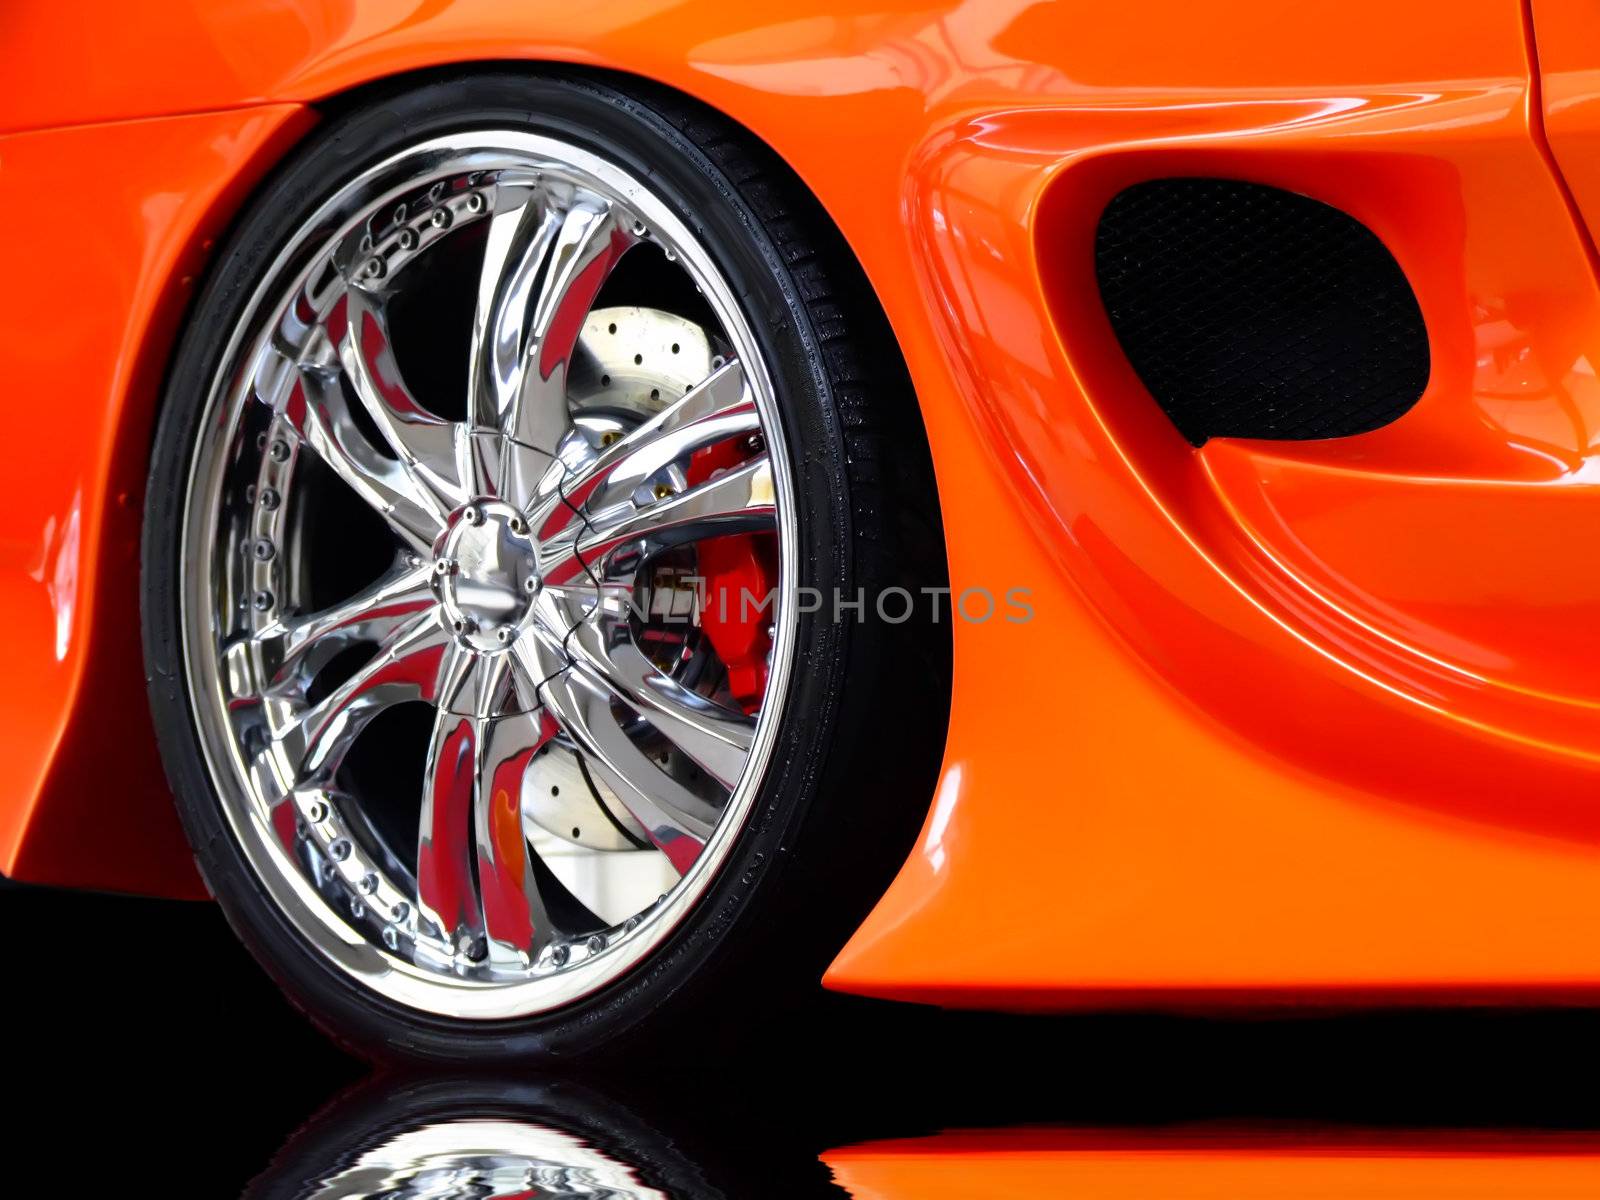 Hot Wheels by PhotoWorks